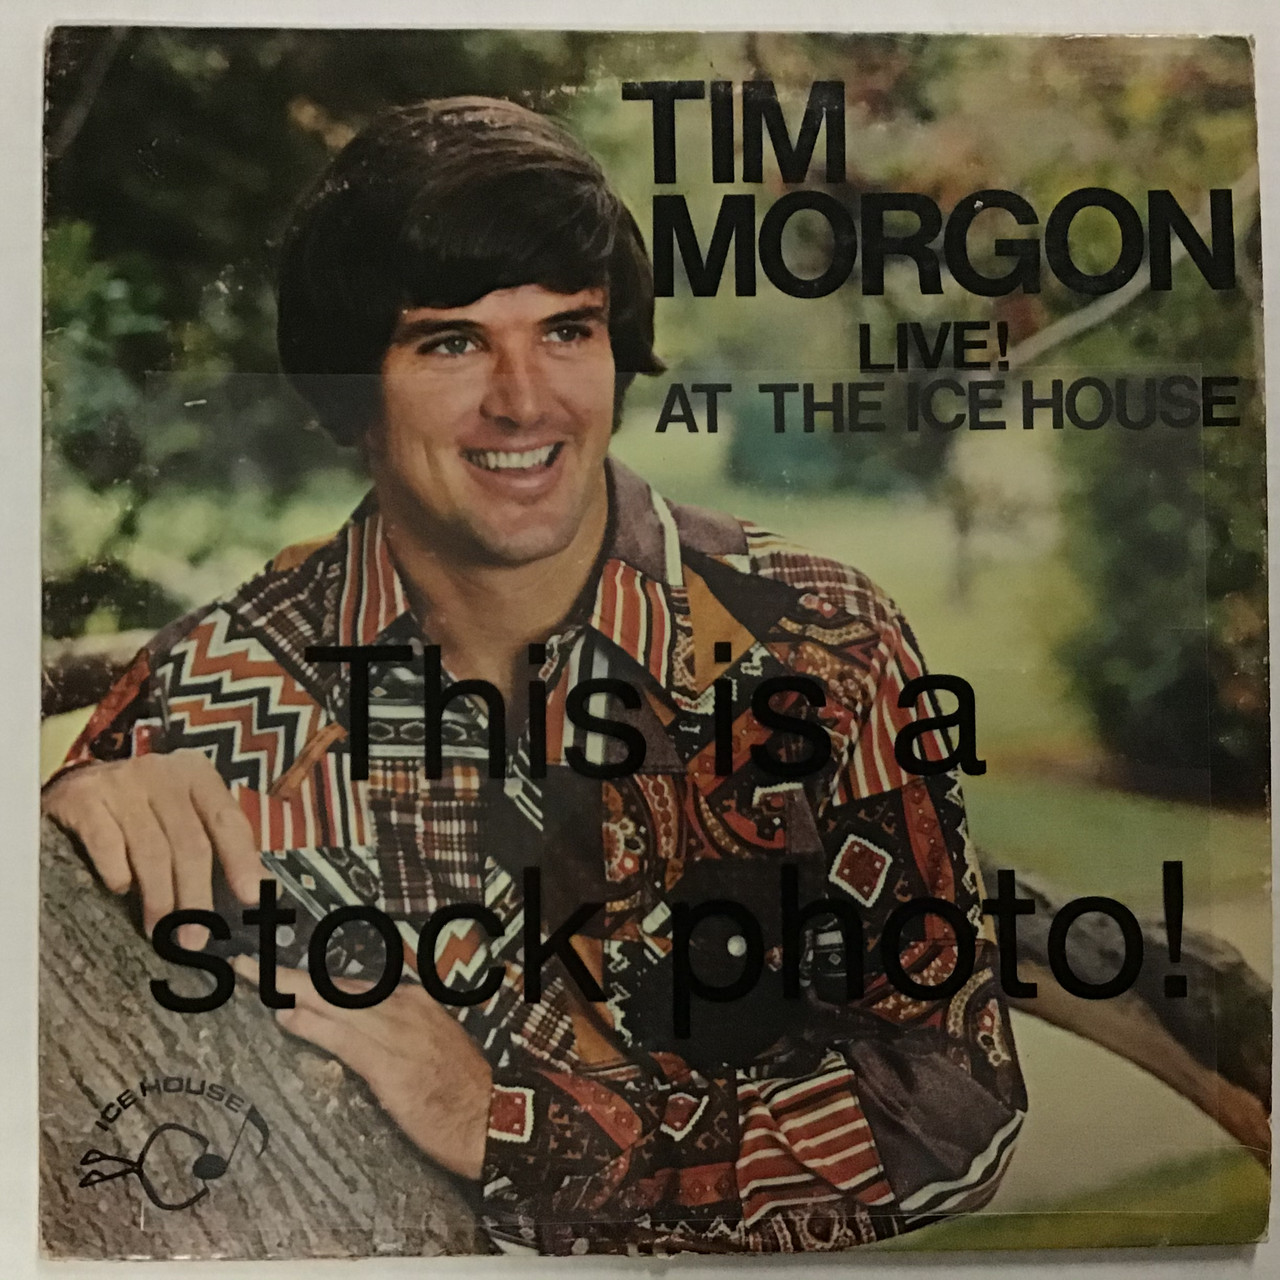 Tim Morgon ‎– Live! At The Ice House - AUTOGRAPHED - vinyl record LP